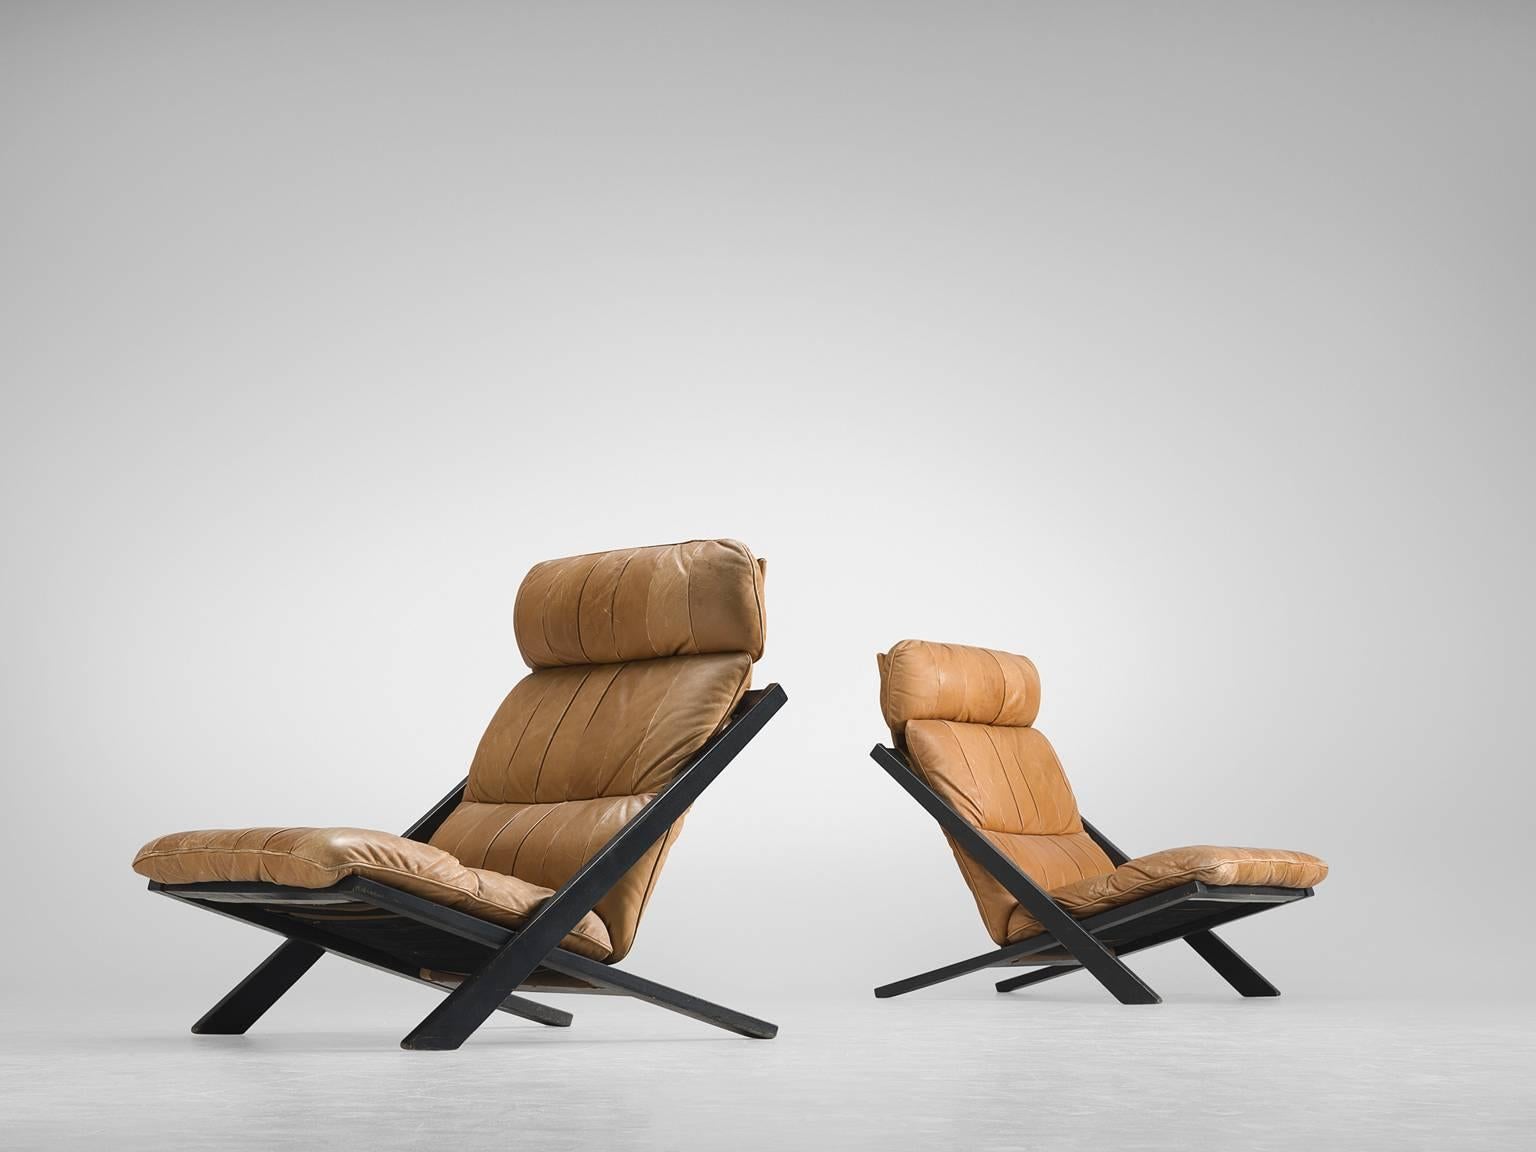 Pair of lounge chairs, in wood and leather by Ueli bergere for De Sede, Switzerland, 1970s.

High back lounge chairs by de Swiss quality manufacturer De Sede. The X-shaped frame consists of black lacquered wood. This makes an interesting contrast